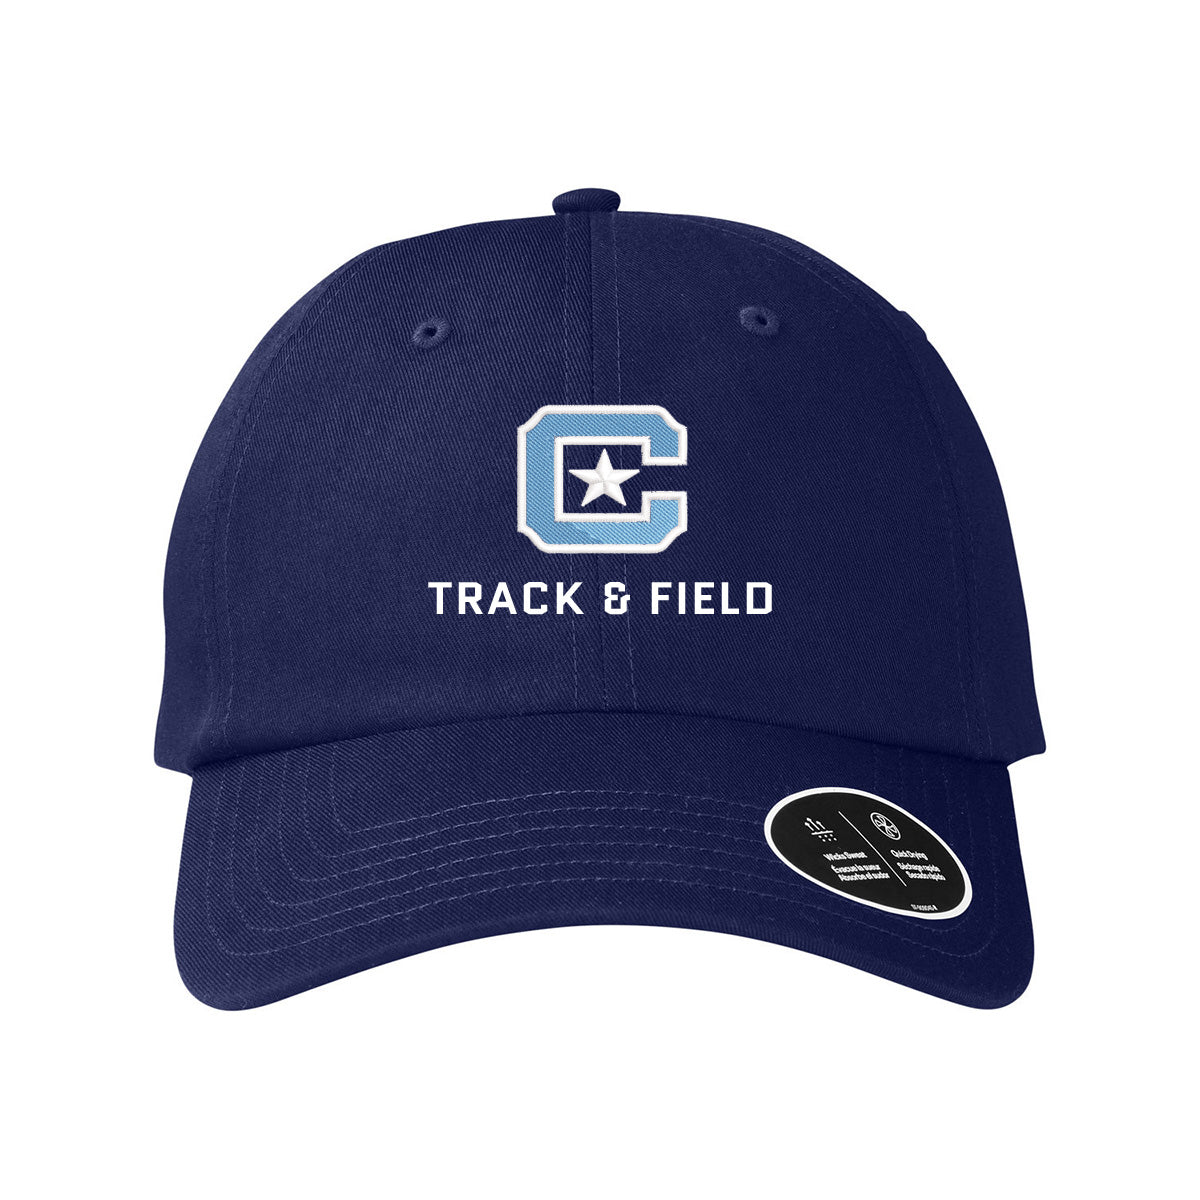 The Citadel C, Club Sports - Track & Field Under Armour Team Chino Hat